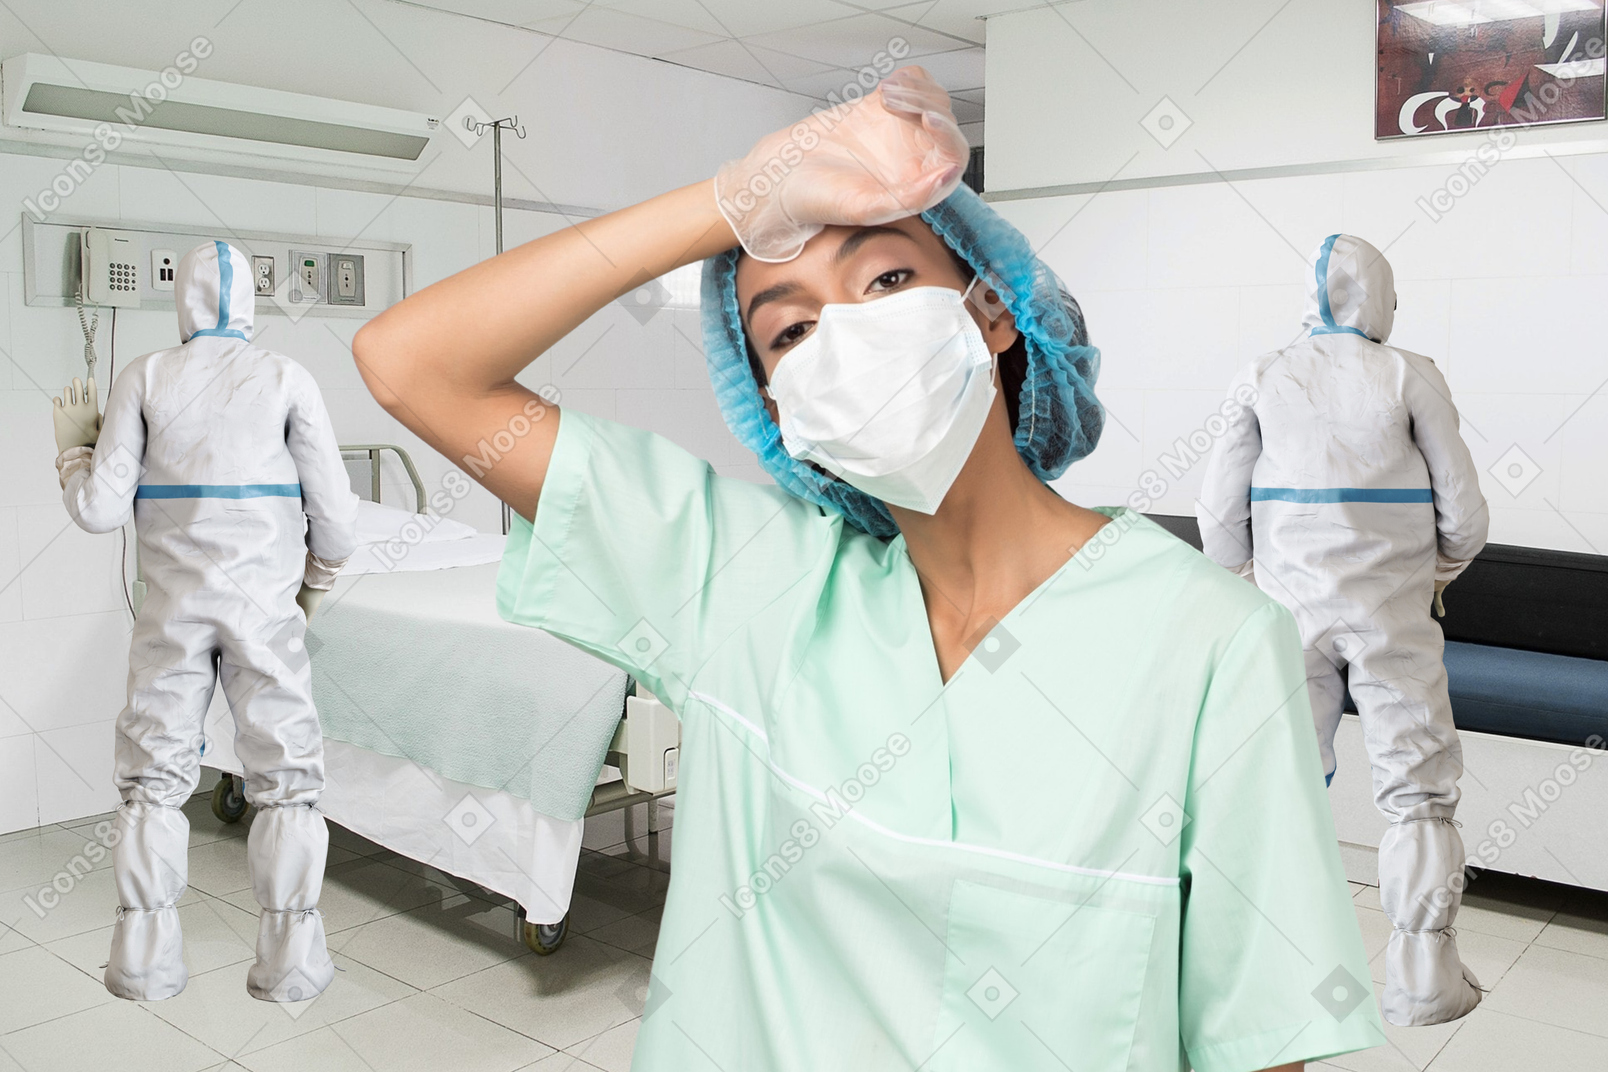 A woman wearing a surgical mask in a hospital